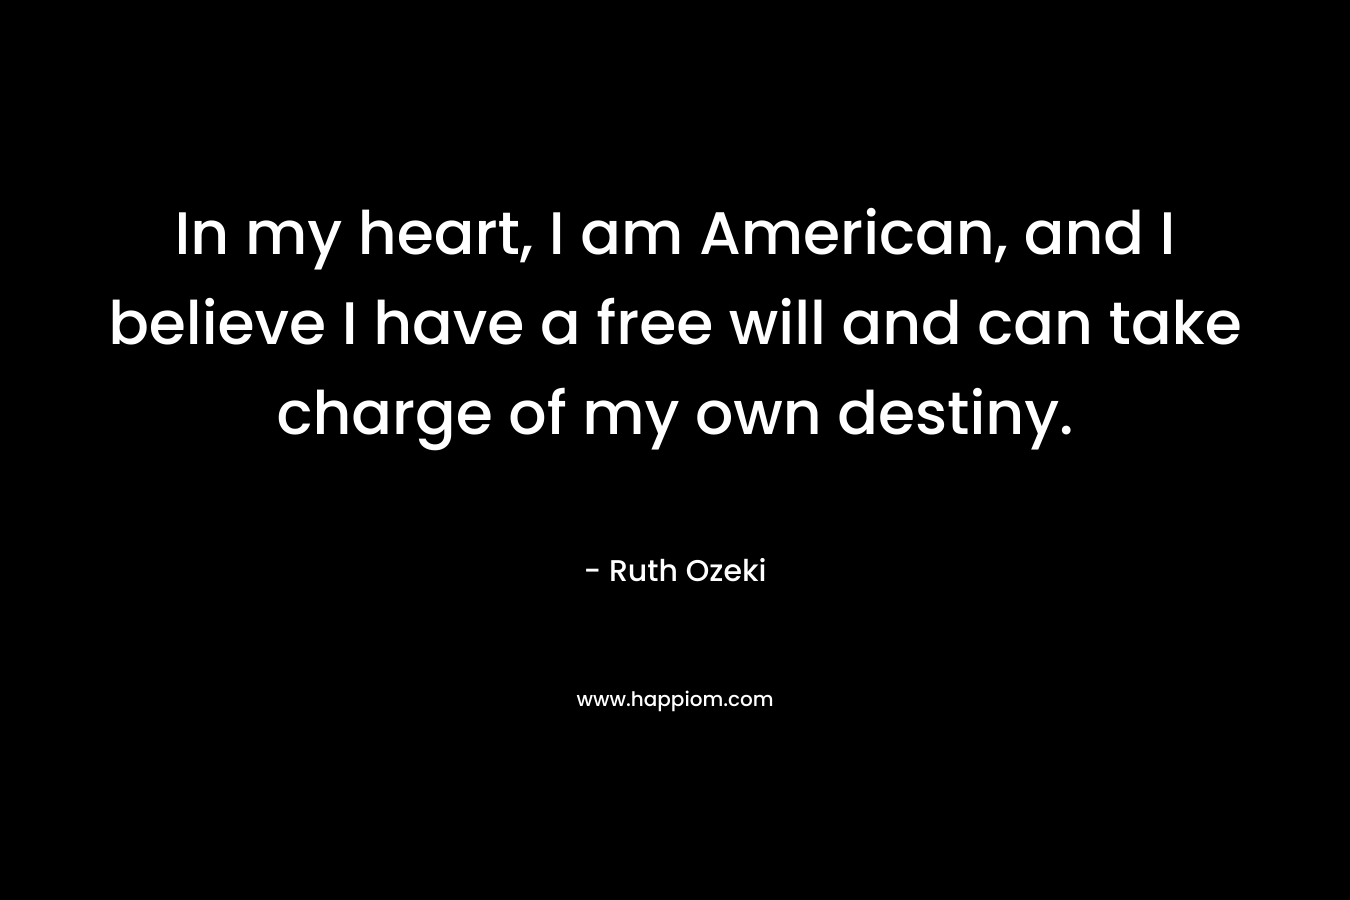 In my heart, I am American, and I believe I have a free will and can take charge of my own destiny.